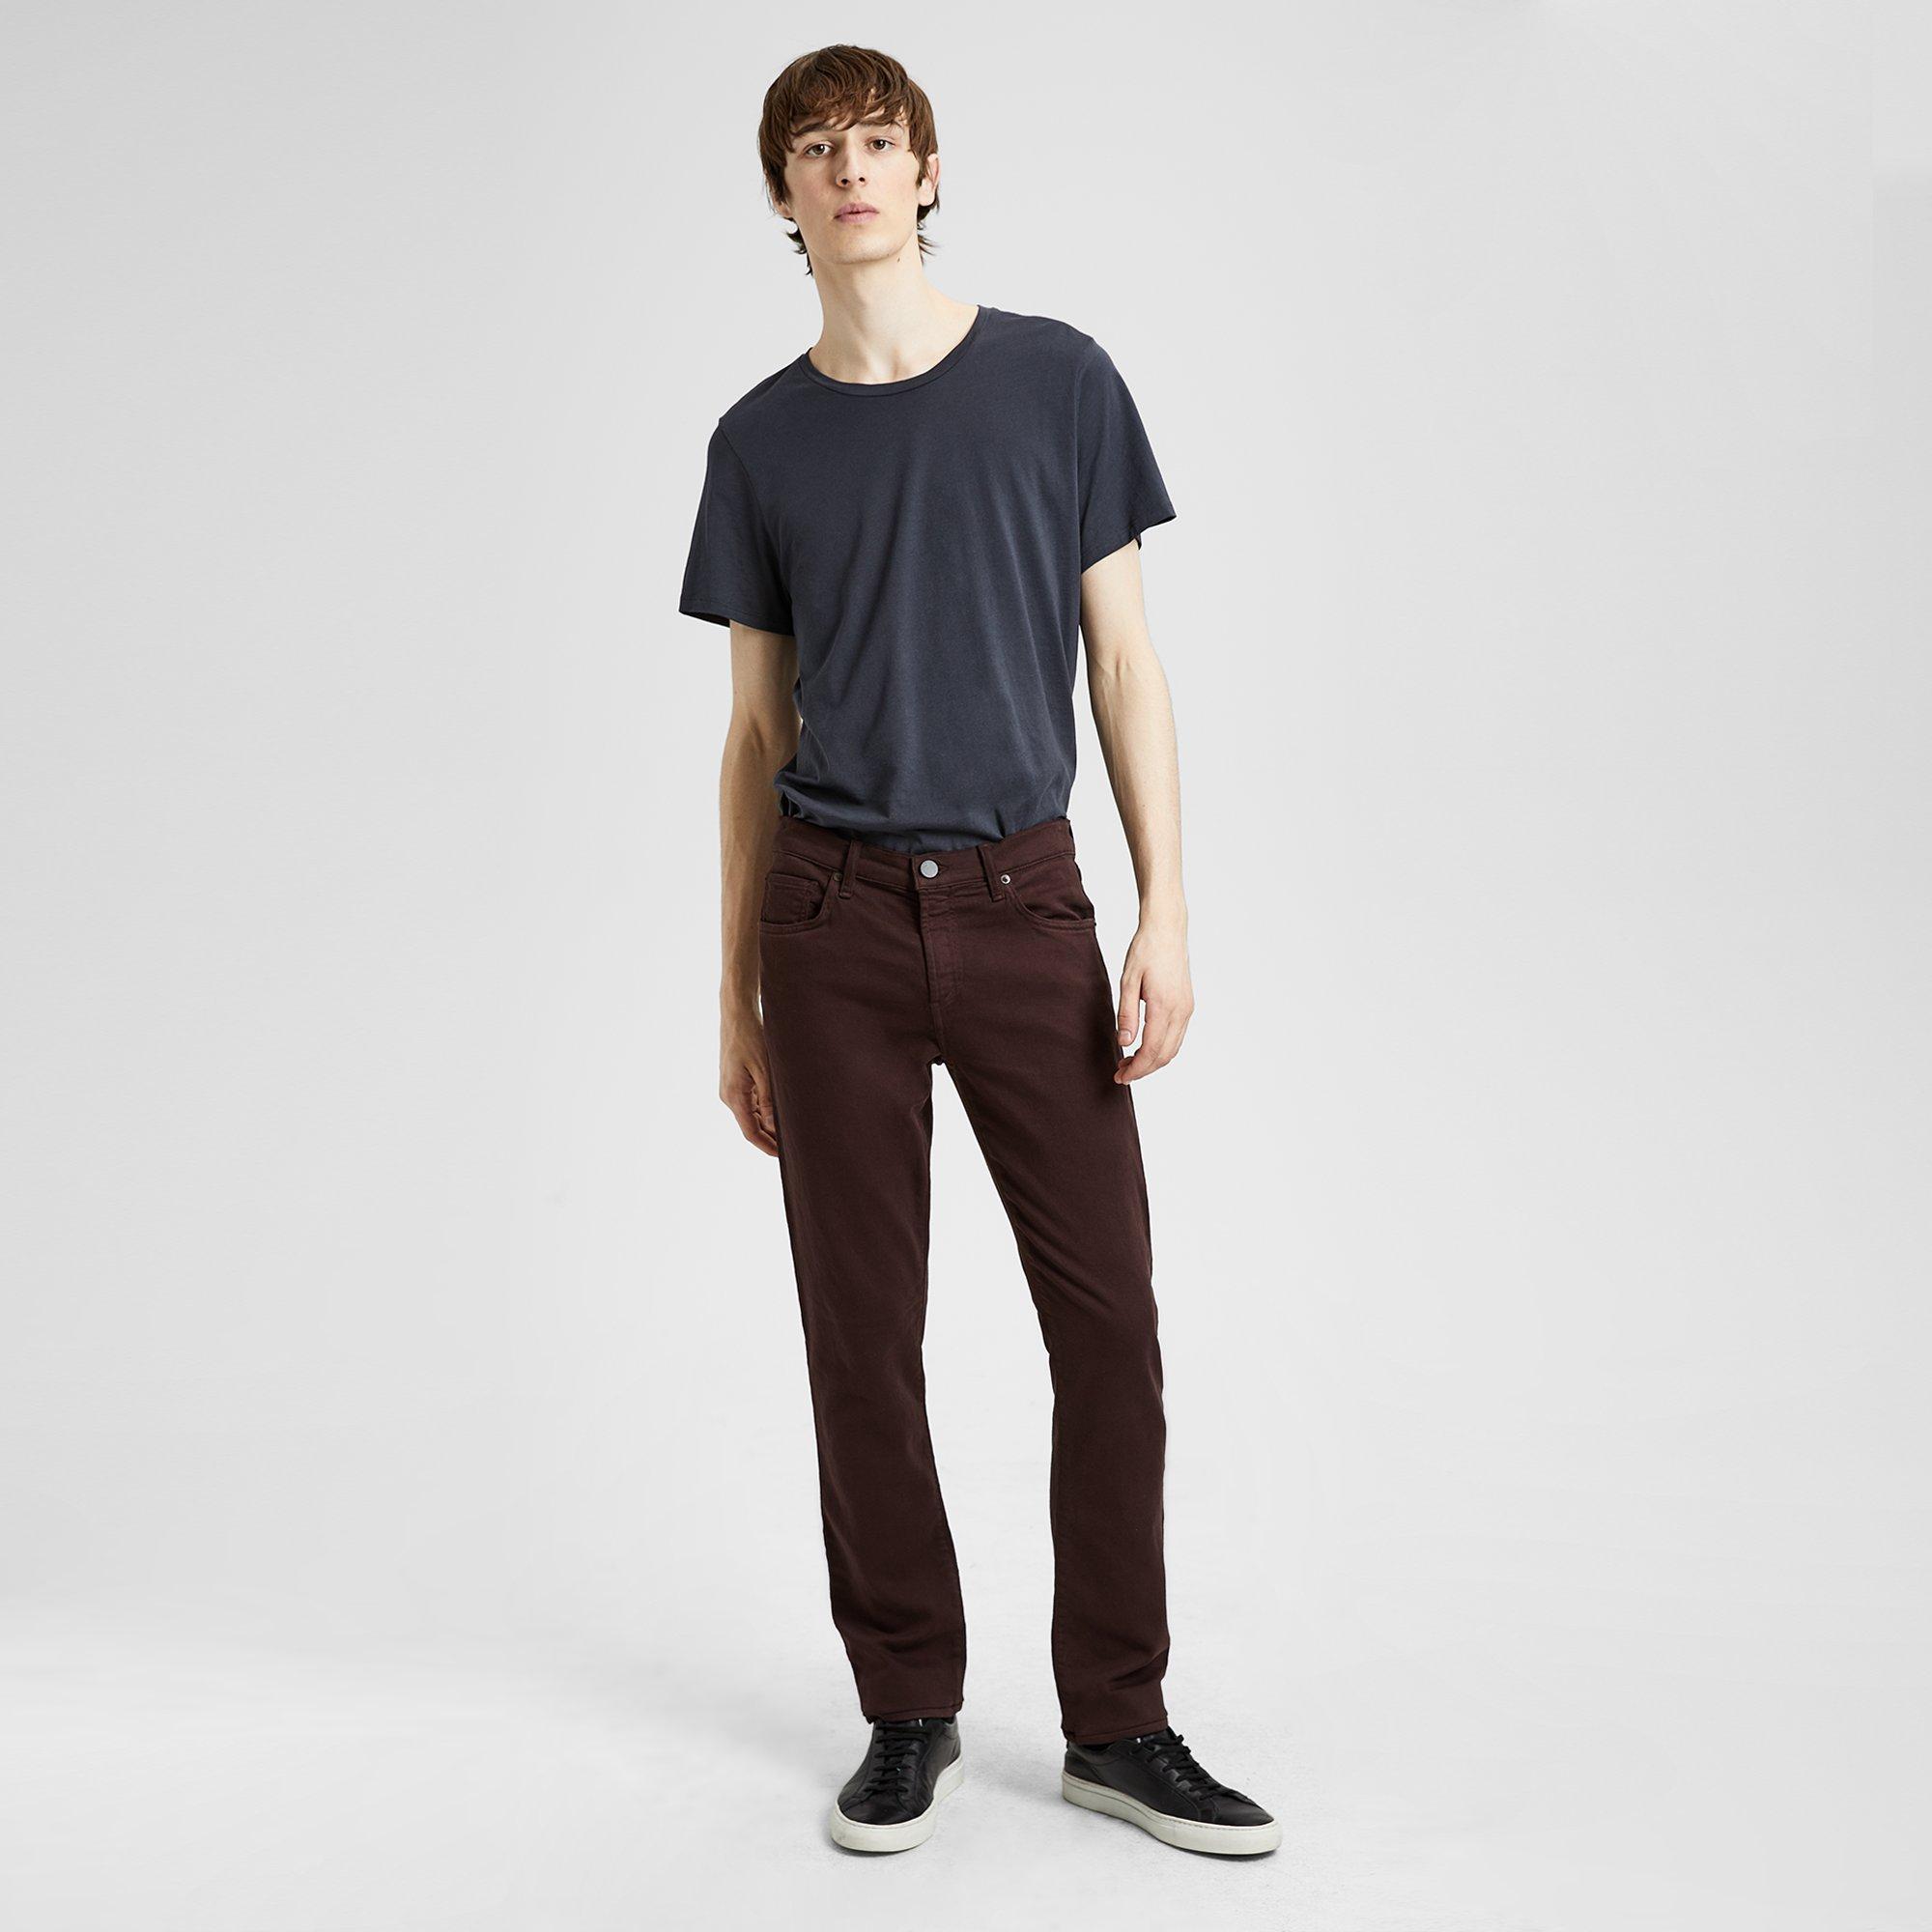 Theory Outlet Official Site  J Brand Kane Straight Fit Jean in French Terry